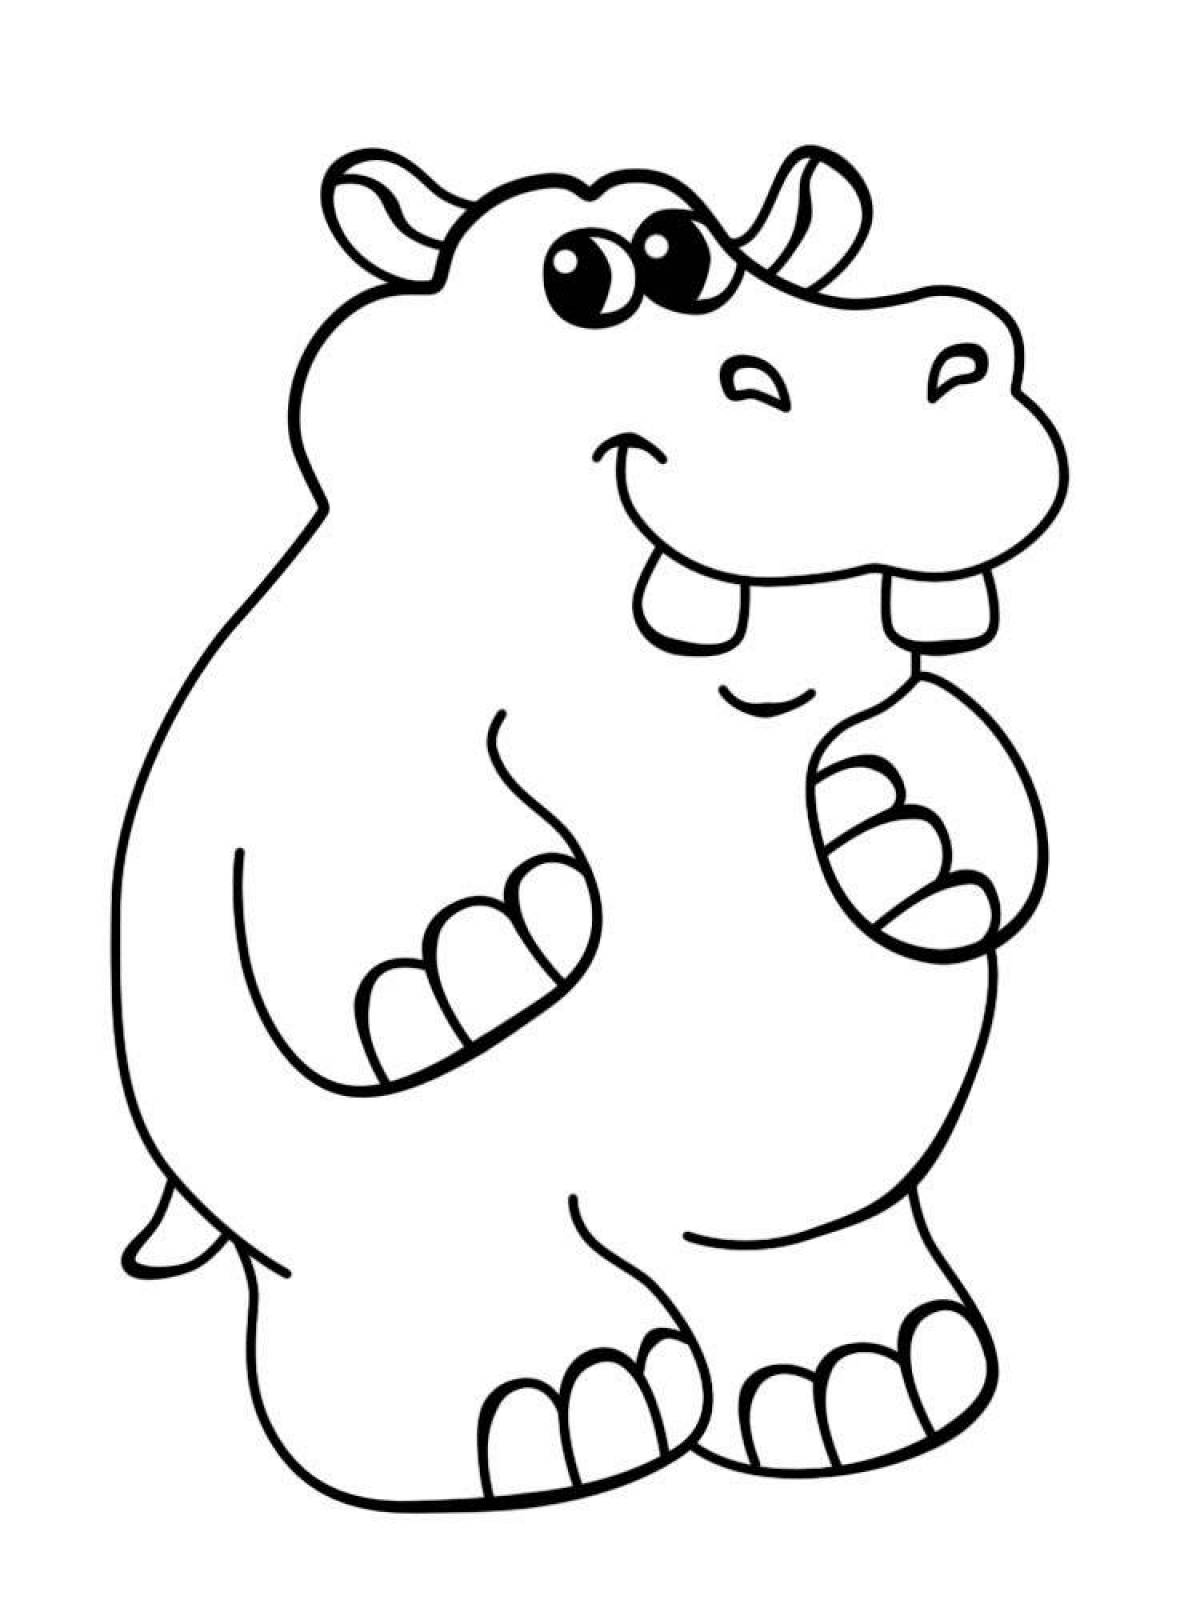 Exquisite hippo coloring for kids